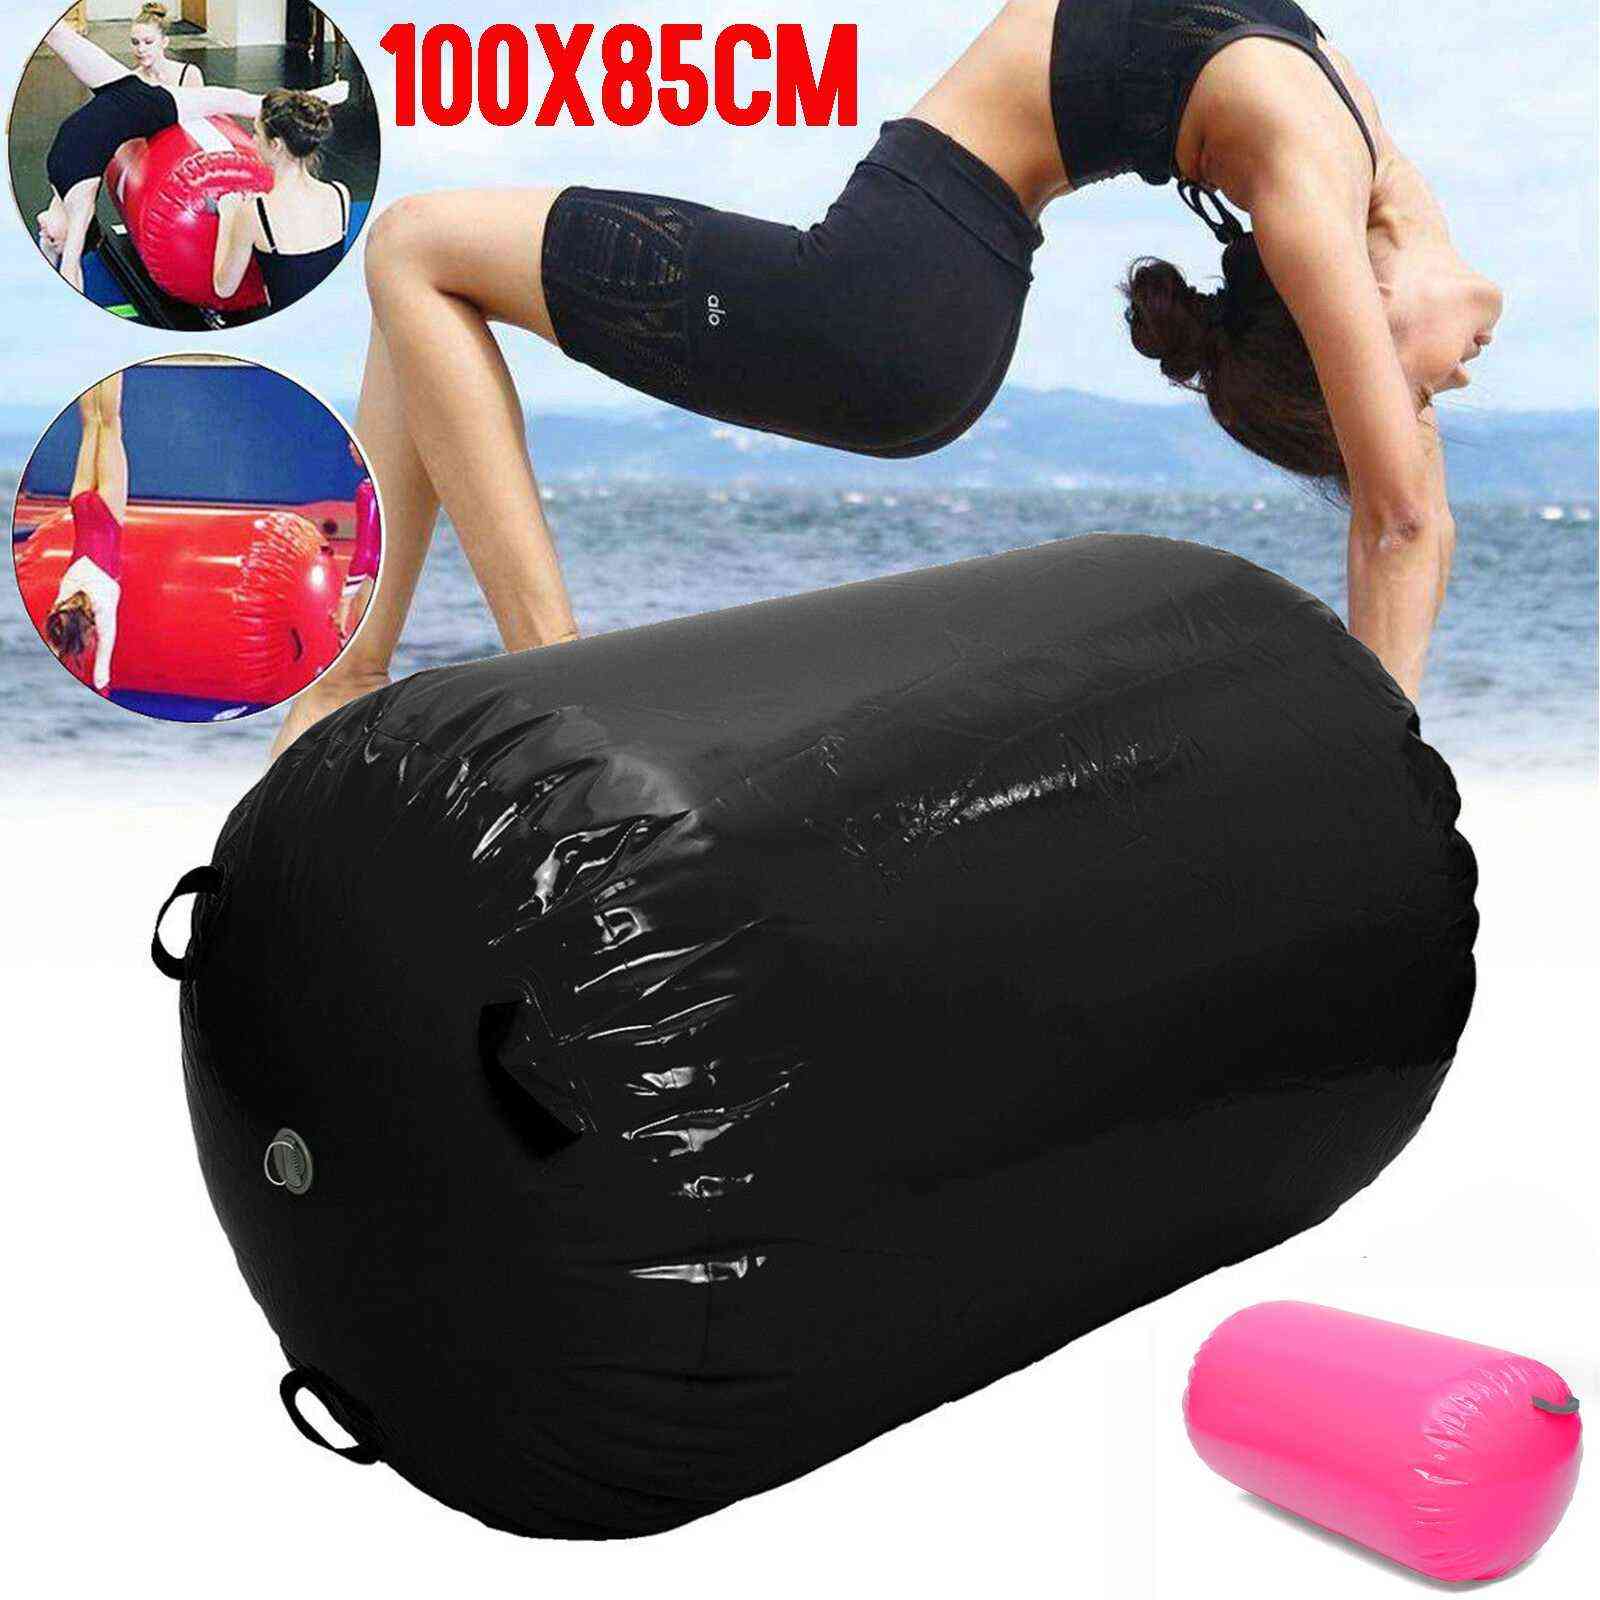 Inflatable Floor Air Mat- Round Column For Gym Amd Home Exercise